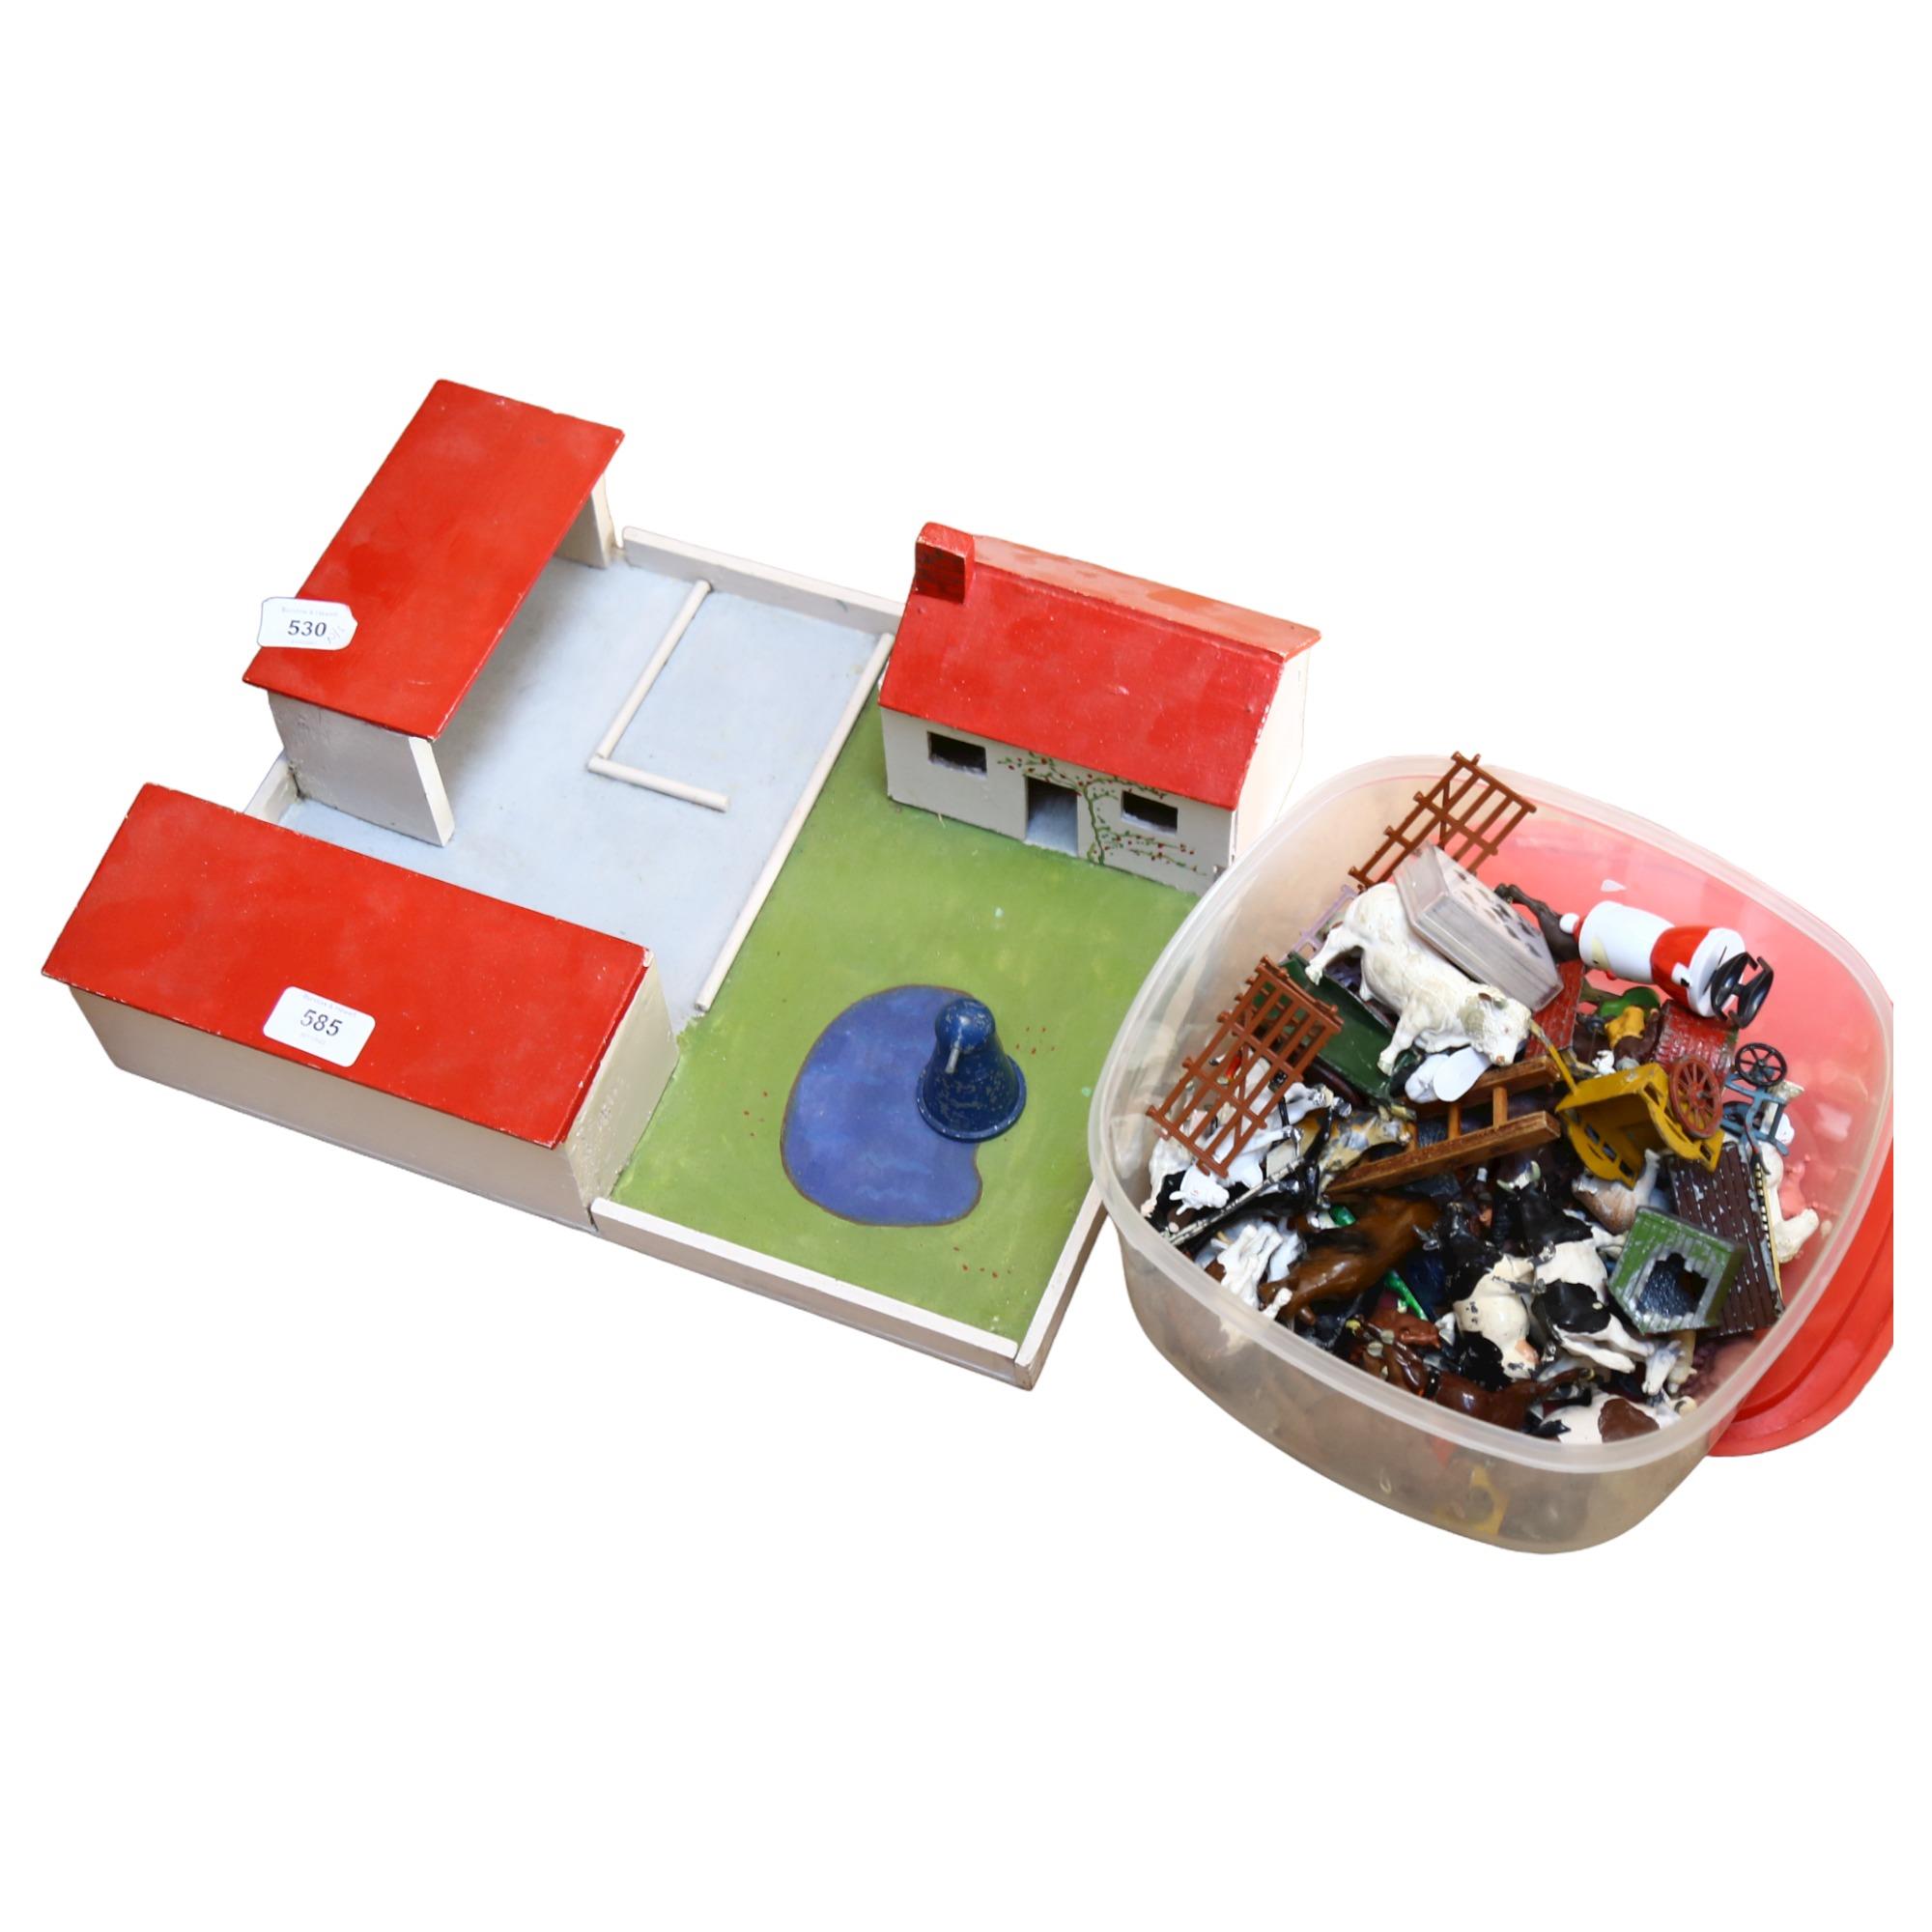 A Vintage handmade toy farmyard, and a quantity of diecast and plastic animals and accessories